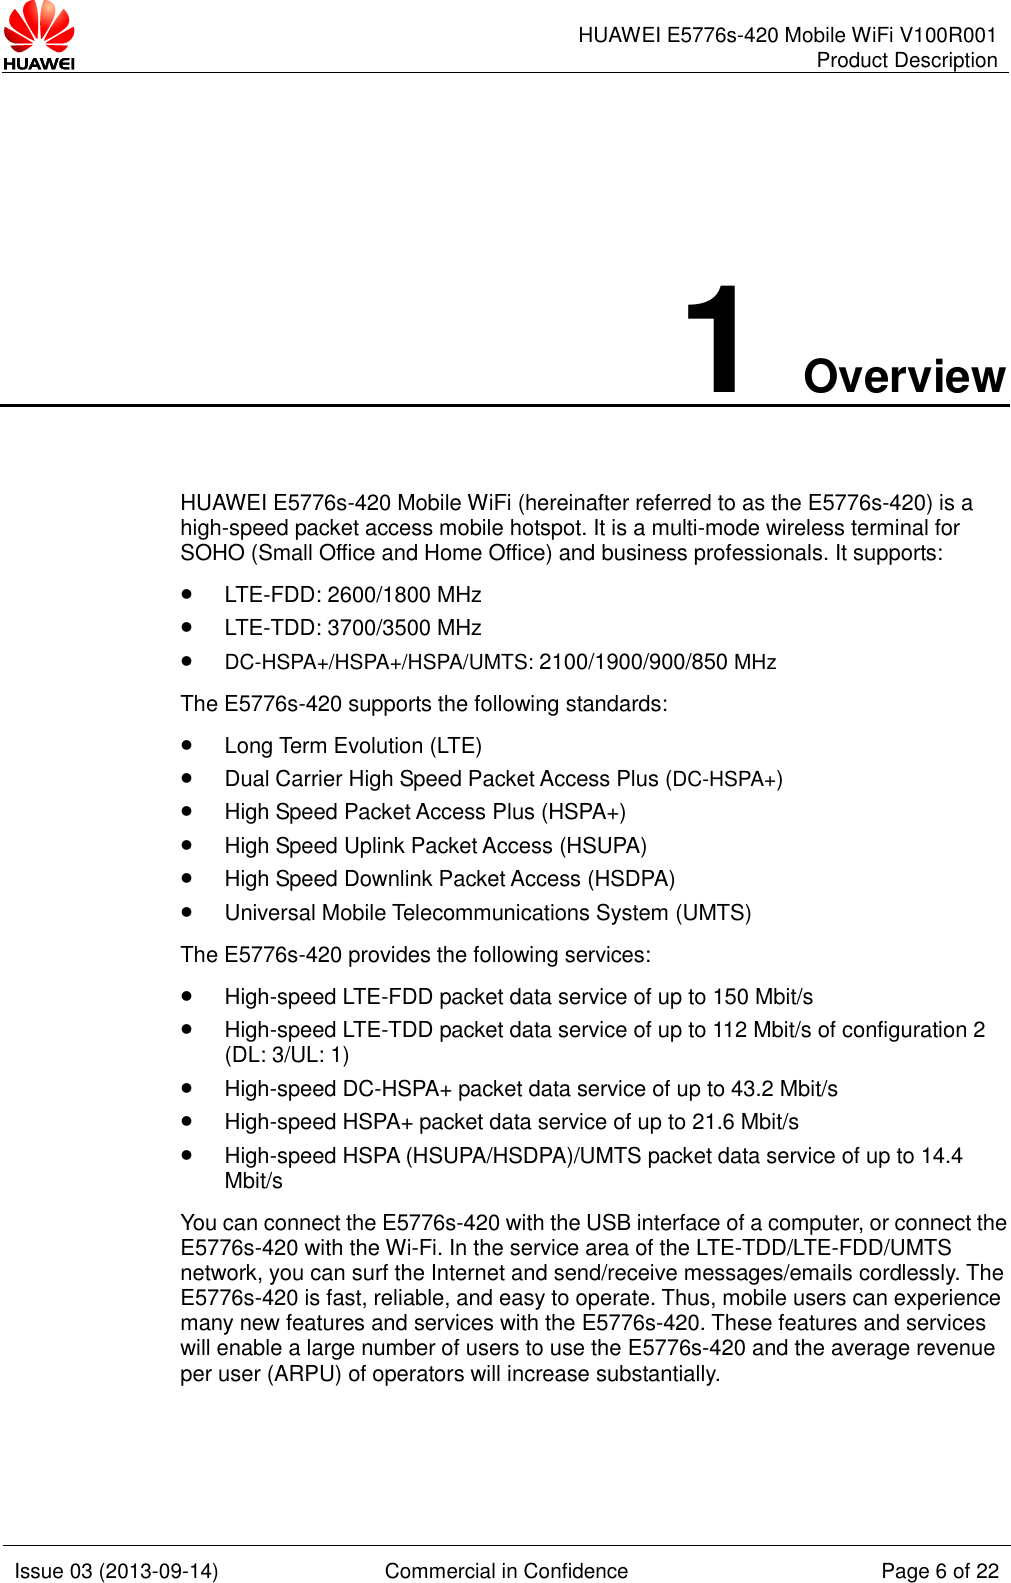      HUAWEI E5776s-420 Mobile WiFi V100R001 Product Description    Issue 03 (2013-09-14) Commercial in Confidence Page 6 of 22  1 Overview HUAWEI E5776s-420 Mobile WiFi (hereinafter referred to as the E5776s-420) is a high-speed packet access mobile hotspot. It is a multi-mode wireless terminal for SOHO (Small Office and Home Office) and business professionals. It supports:  LTE-FDD: 2600/1800 MHz   LTE-TDD: 3700/3500 MHz   DC-HSPA+/HSPA+/HSPA/UMTS: 2100/1900/900/850 MHz The E5776s-420 supports the following standards:  Long Term Evolution (LTE)  Dual Carrier High Speed Packet Access Plus (DC-HSPA+)  High Speed Packet Access Plus (HSPA+)  High Speed Uplink Packet Access (HSUPA)  High Speed Downlink Packet Access (HSDPA)  Universal Mobile Telecommunications System (UMTS) The E5776s-420 provides the following services:  High-speed LTE-FDD packet data service of up to 150 Mbit/s    High-speed LTE-TDD packet data service of up to 112 Mbit/s of configuration 2 (DL: 3/UL: 1)  High-speed DC-HSPA+ packet data service of up to 43.2 Mbit/s  High-speed HSPA+ packet data service of up to 21.6 Mbit/s  High-speed HSPA (HSUPA/HSDPA)/UMTS packet data service of up to 14.4 Mbit/s You can connect the E5776s-420 with the USB interface of a computer, or connect the E5776s-420 with the Wi-Fi. In the service area of the LTE-TDD/LTE-FDD/UMTS network, you can surf the Internet and send/receive messages/emails cordlessly. The E5776s-420 is fast, reliable, and easy to operate. Thus, mobile users can experience many new features and services with the E5776s-420. These features and services will enable a large number of users to use the E5776s-420 and the average revenue per user (ARPU) of operators will increase substantially.   